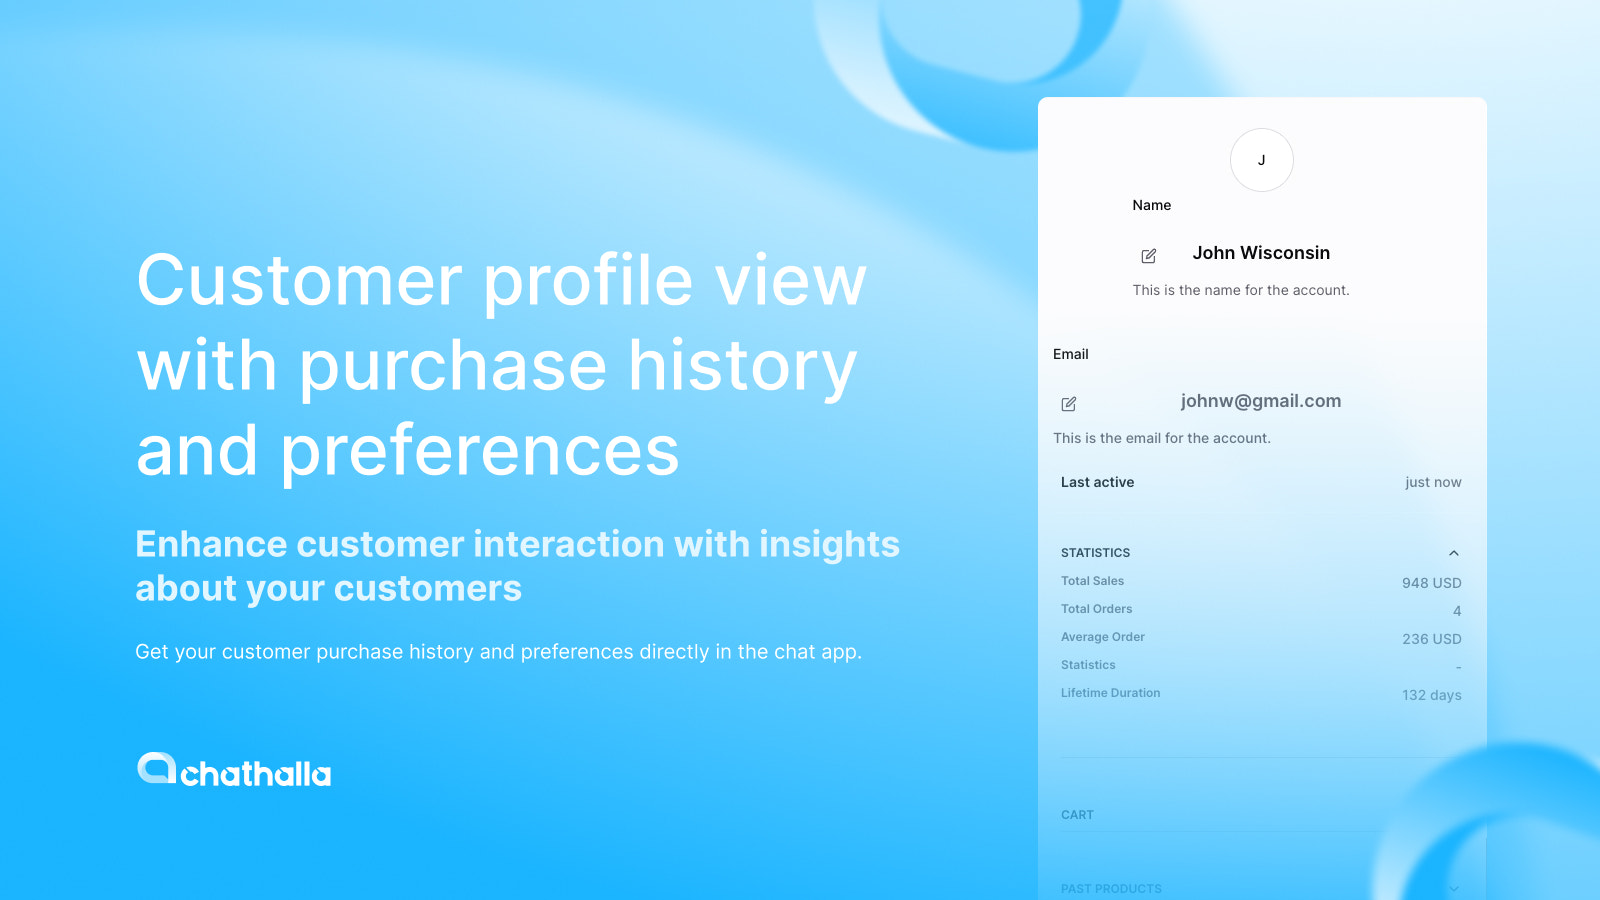 Customer profile view with purchase history and preferences